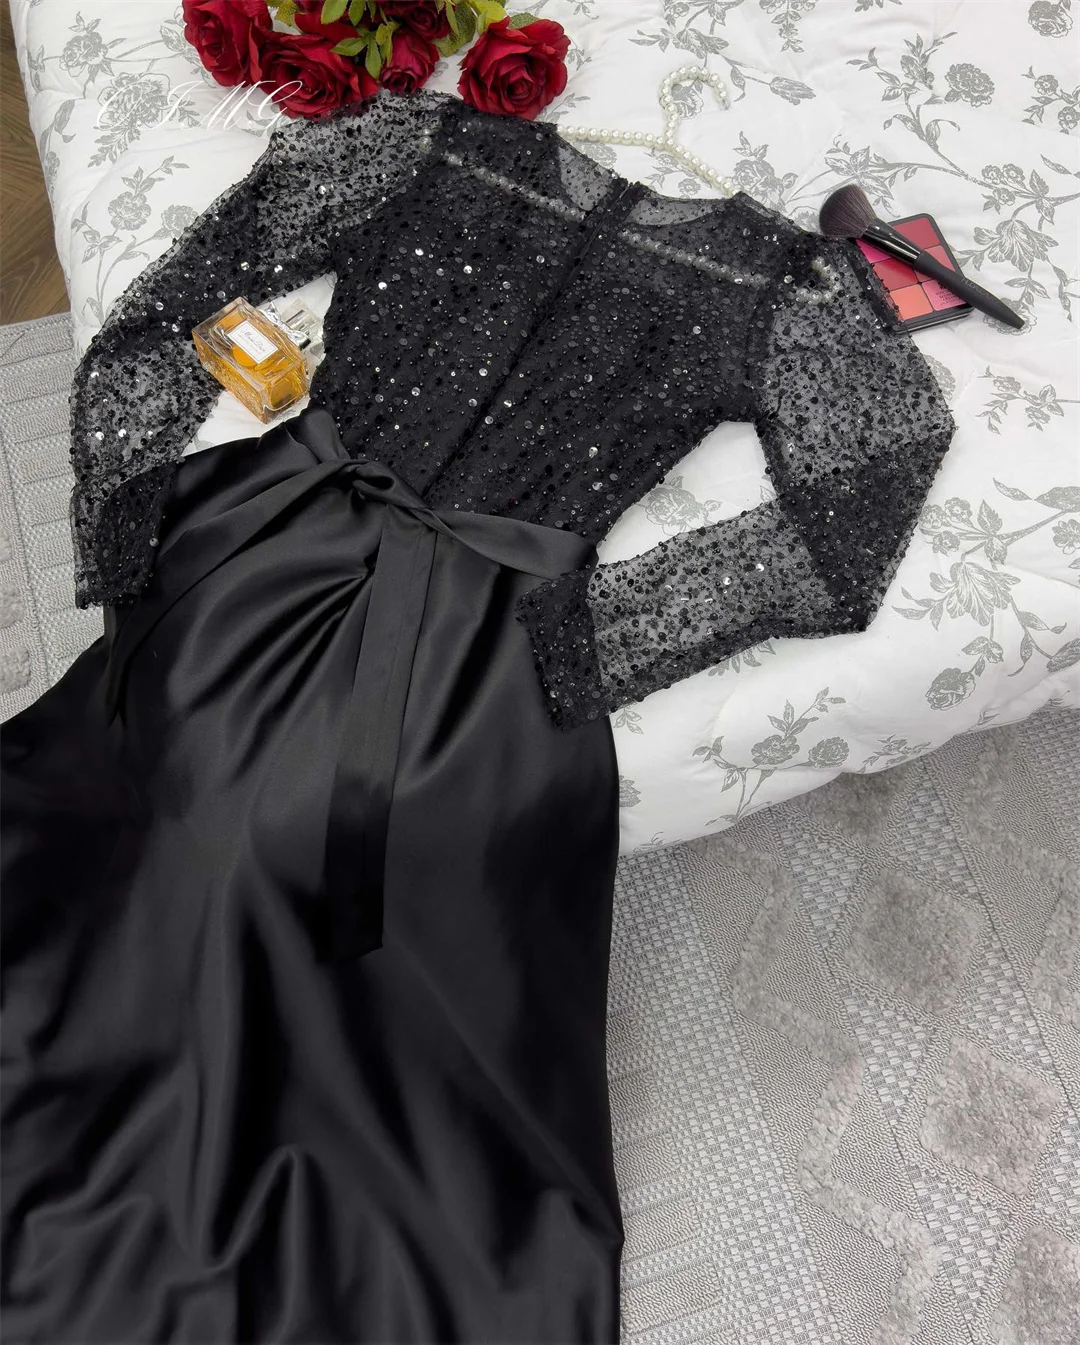 OIMG O-Neck Black Sequined Prom Dresses Mermaid Women Satin Long Sleeves Vintage Elegant Evening Gowns Formal Party Dress